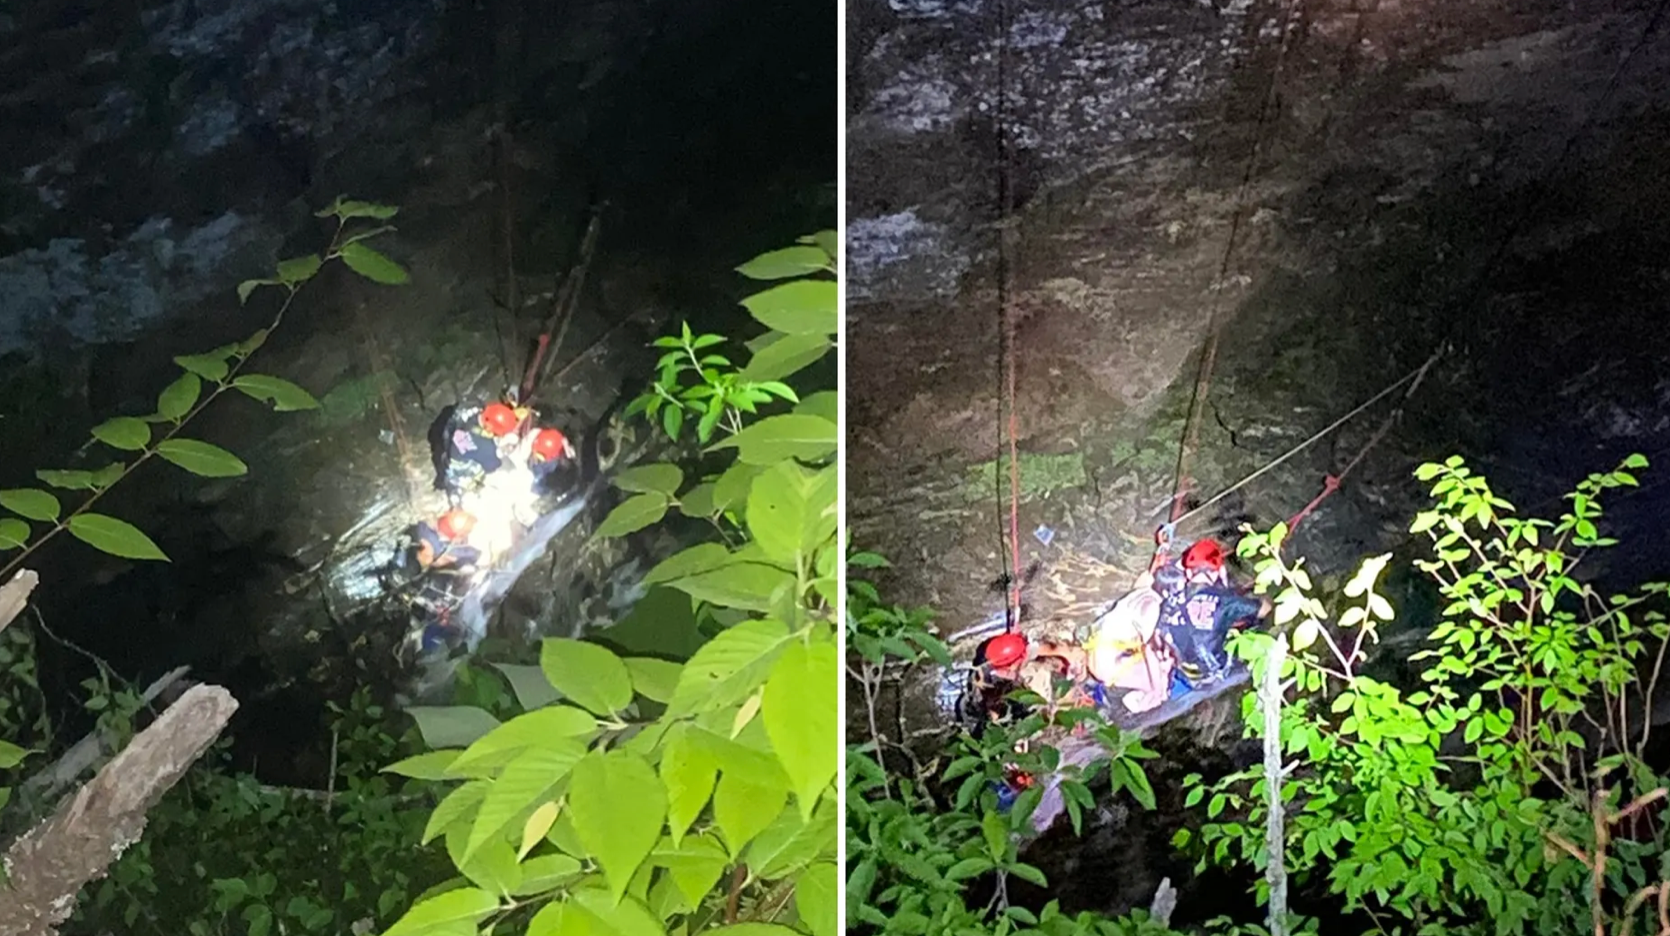 The six hour mission to rescue a 17 year old hiker was described as a ‘miracle'